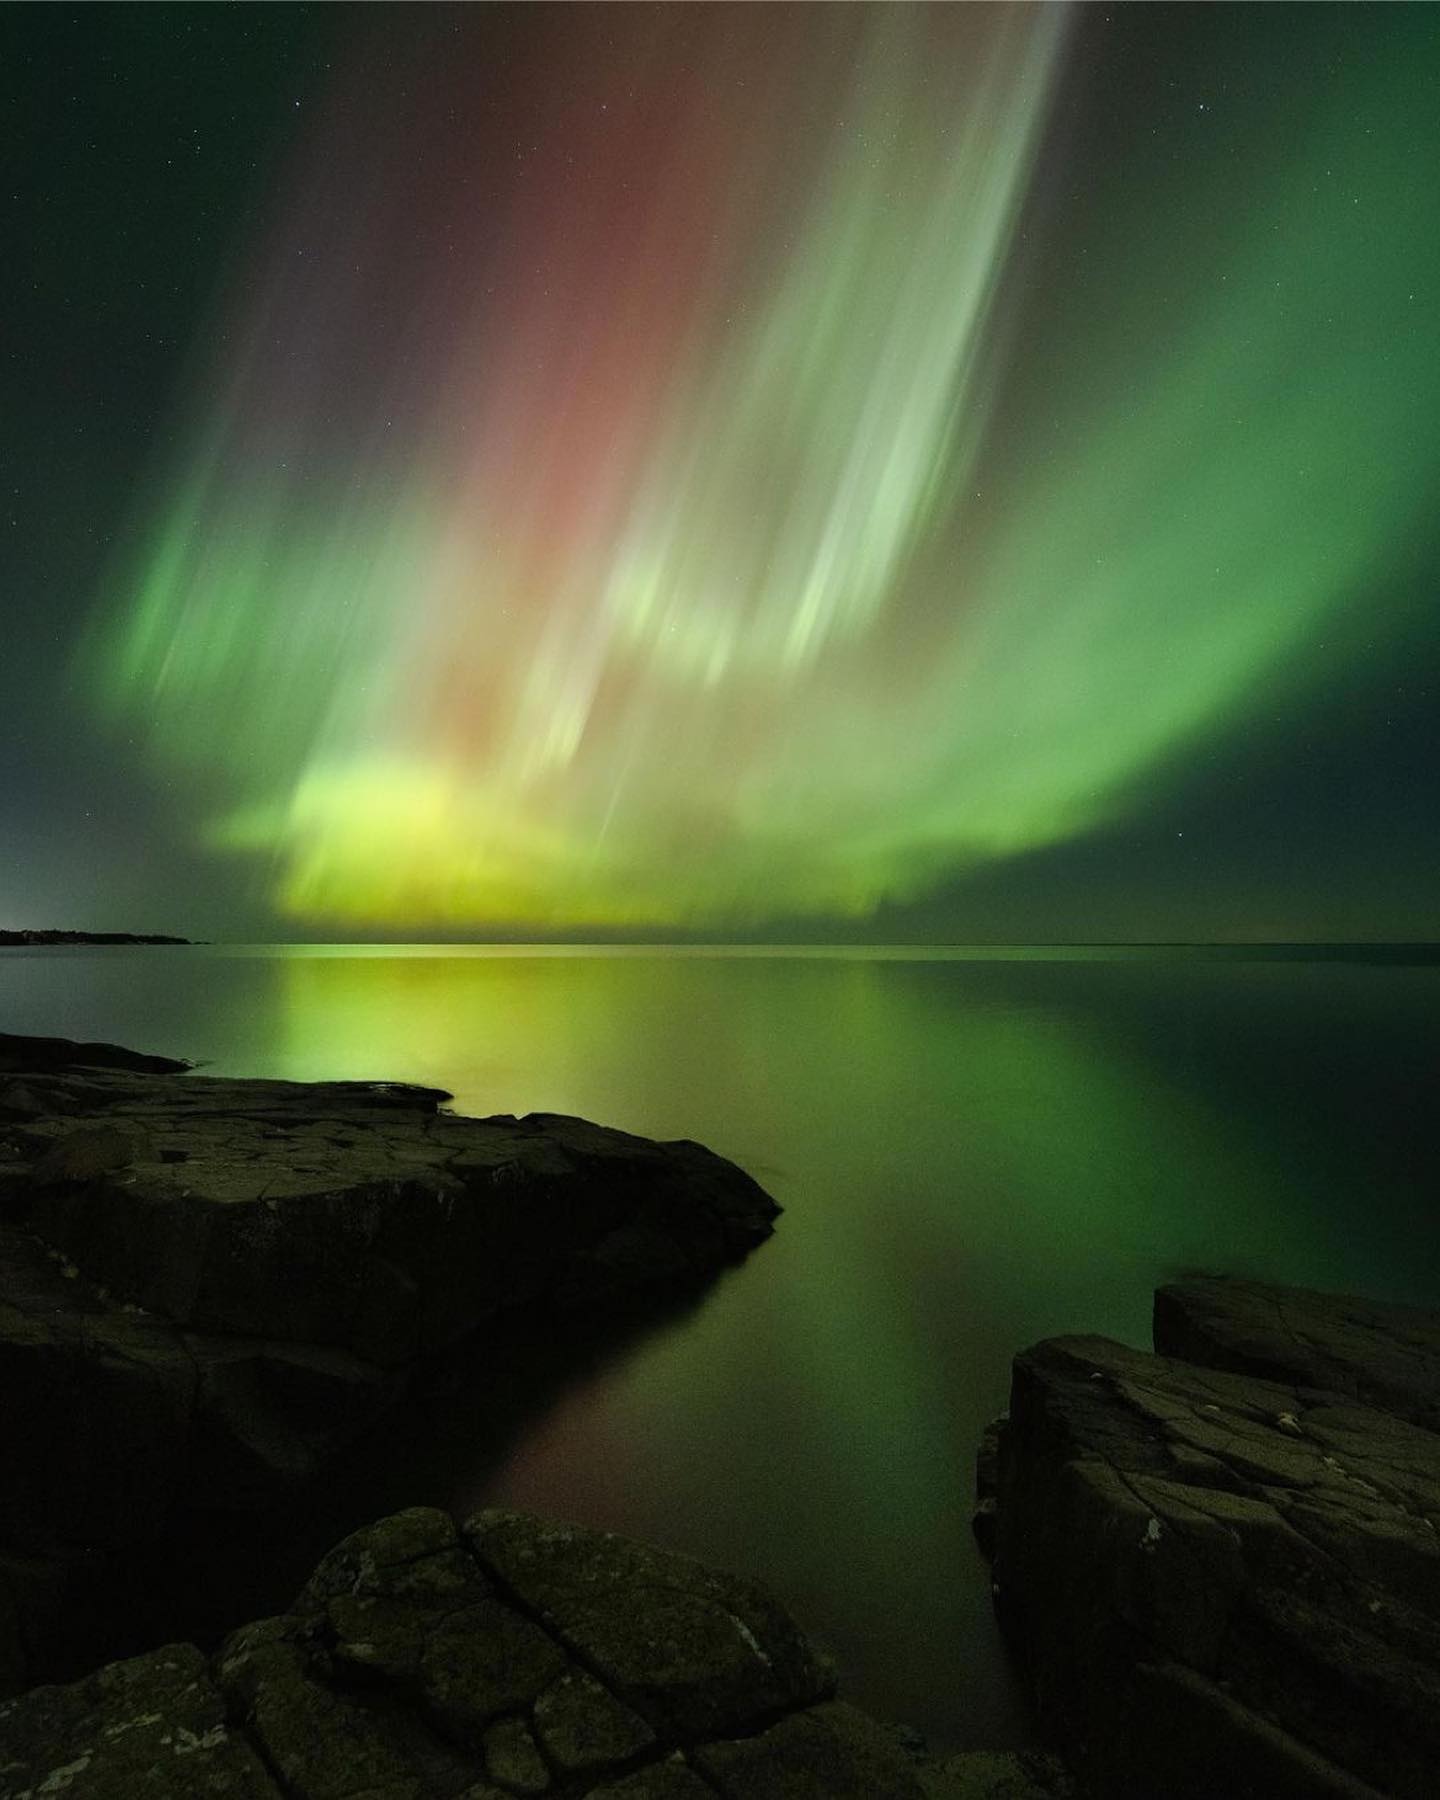 Thank you for sharing @colin.willemsen•“Coronation”Thursday’s nights Aurora show was like something out of a dream. Seeing the Northern Lights dance over Lake Superior, to the south, is something I never thought I’d see. Everything about this night was so magical and I’m glad so many people got to experience such a magical phenomenon.#mnupstream #upstream #minnesota #twincities #outdoors #northernlights #exploremn #exploremnagain #discoverearth — from Instagram